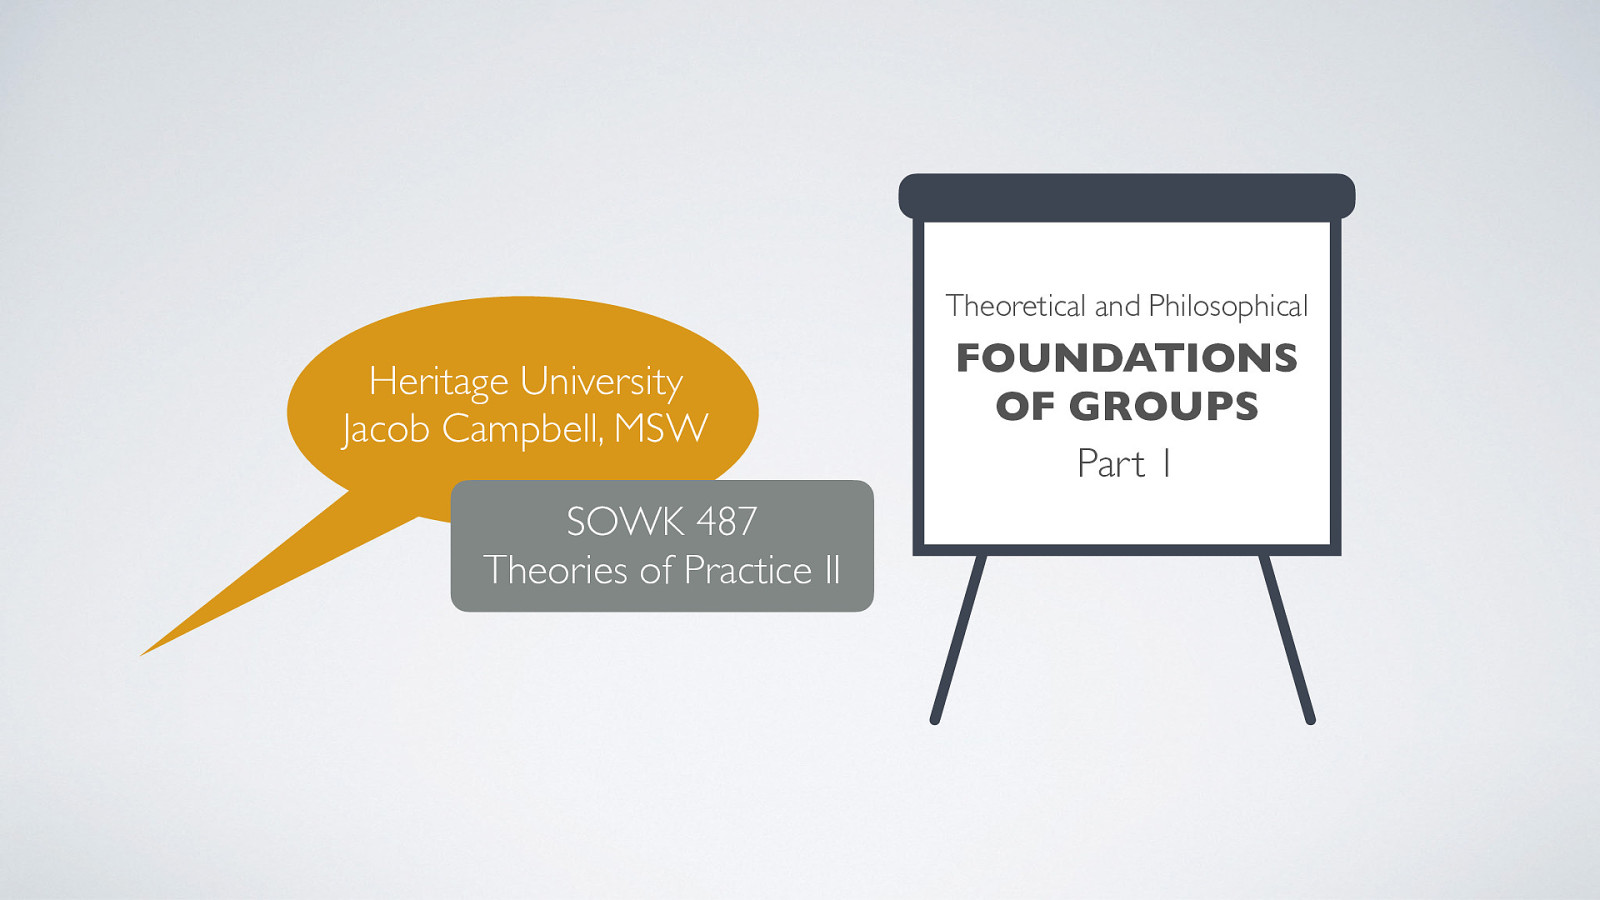 SOWK 487 Week 03 - Theoretical and Philosophical Foundations to Groups part I